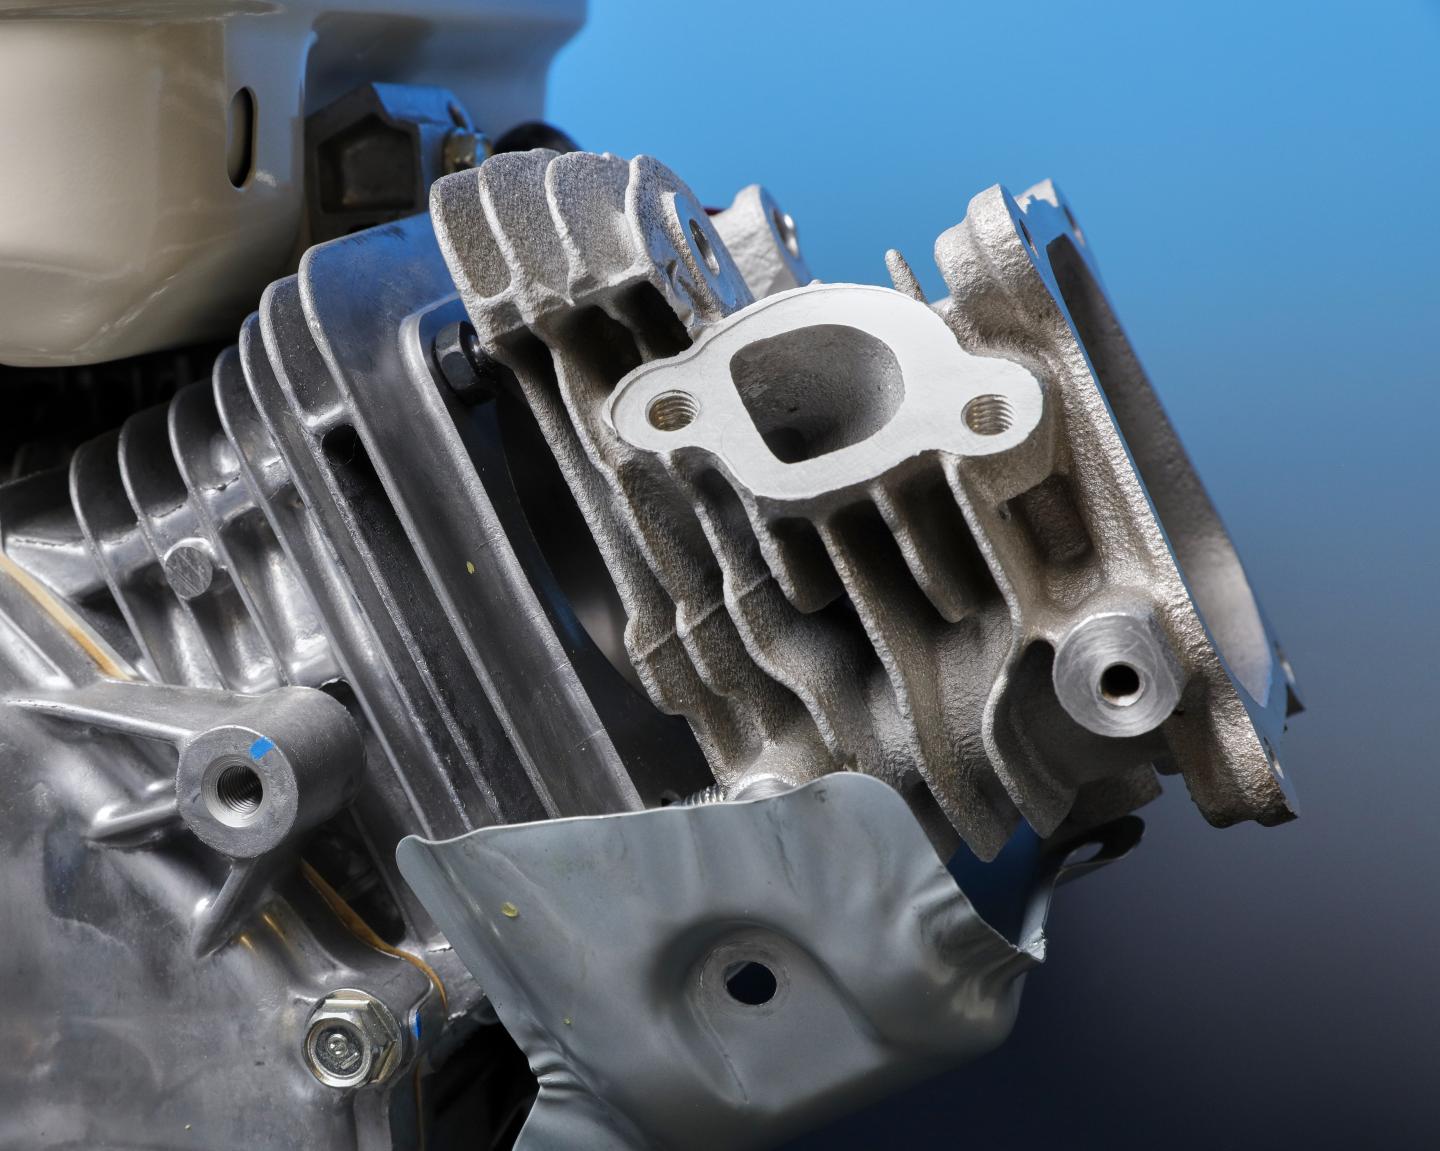 A Cylinder Head Cast by Eck Industries using the Ce-Al Alloy and Tested at ORNL